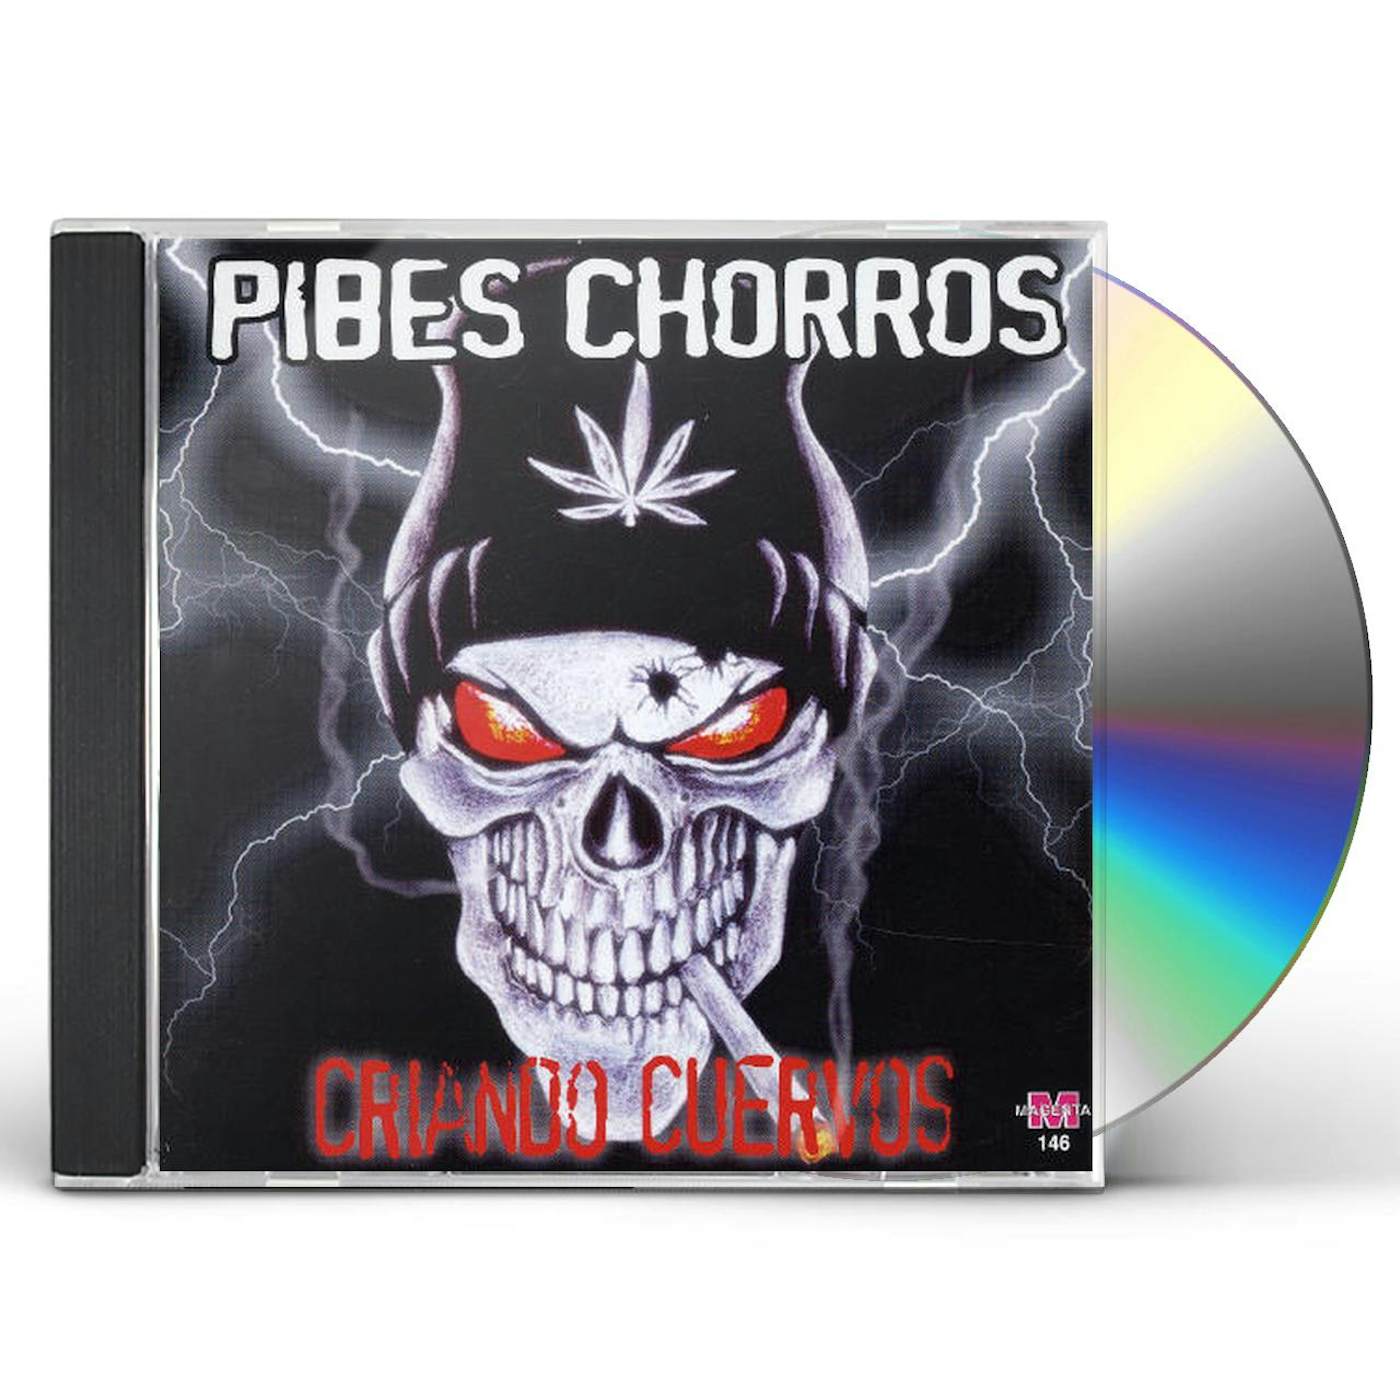 Criando cuervos by Pibes Chorros (Album, Cumbia villera): Reviews, Ratings,  Credits, Song list - Rate Your Music